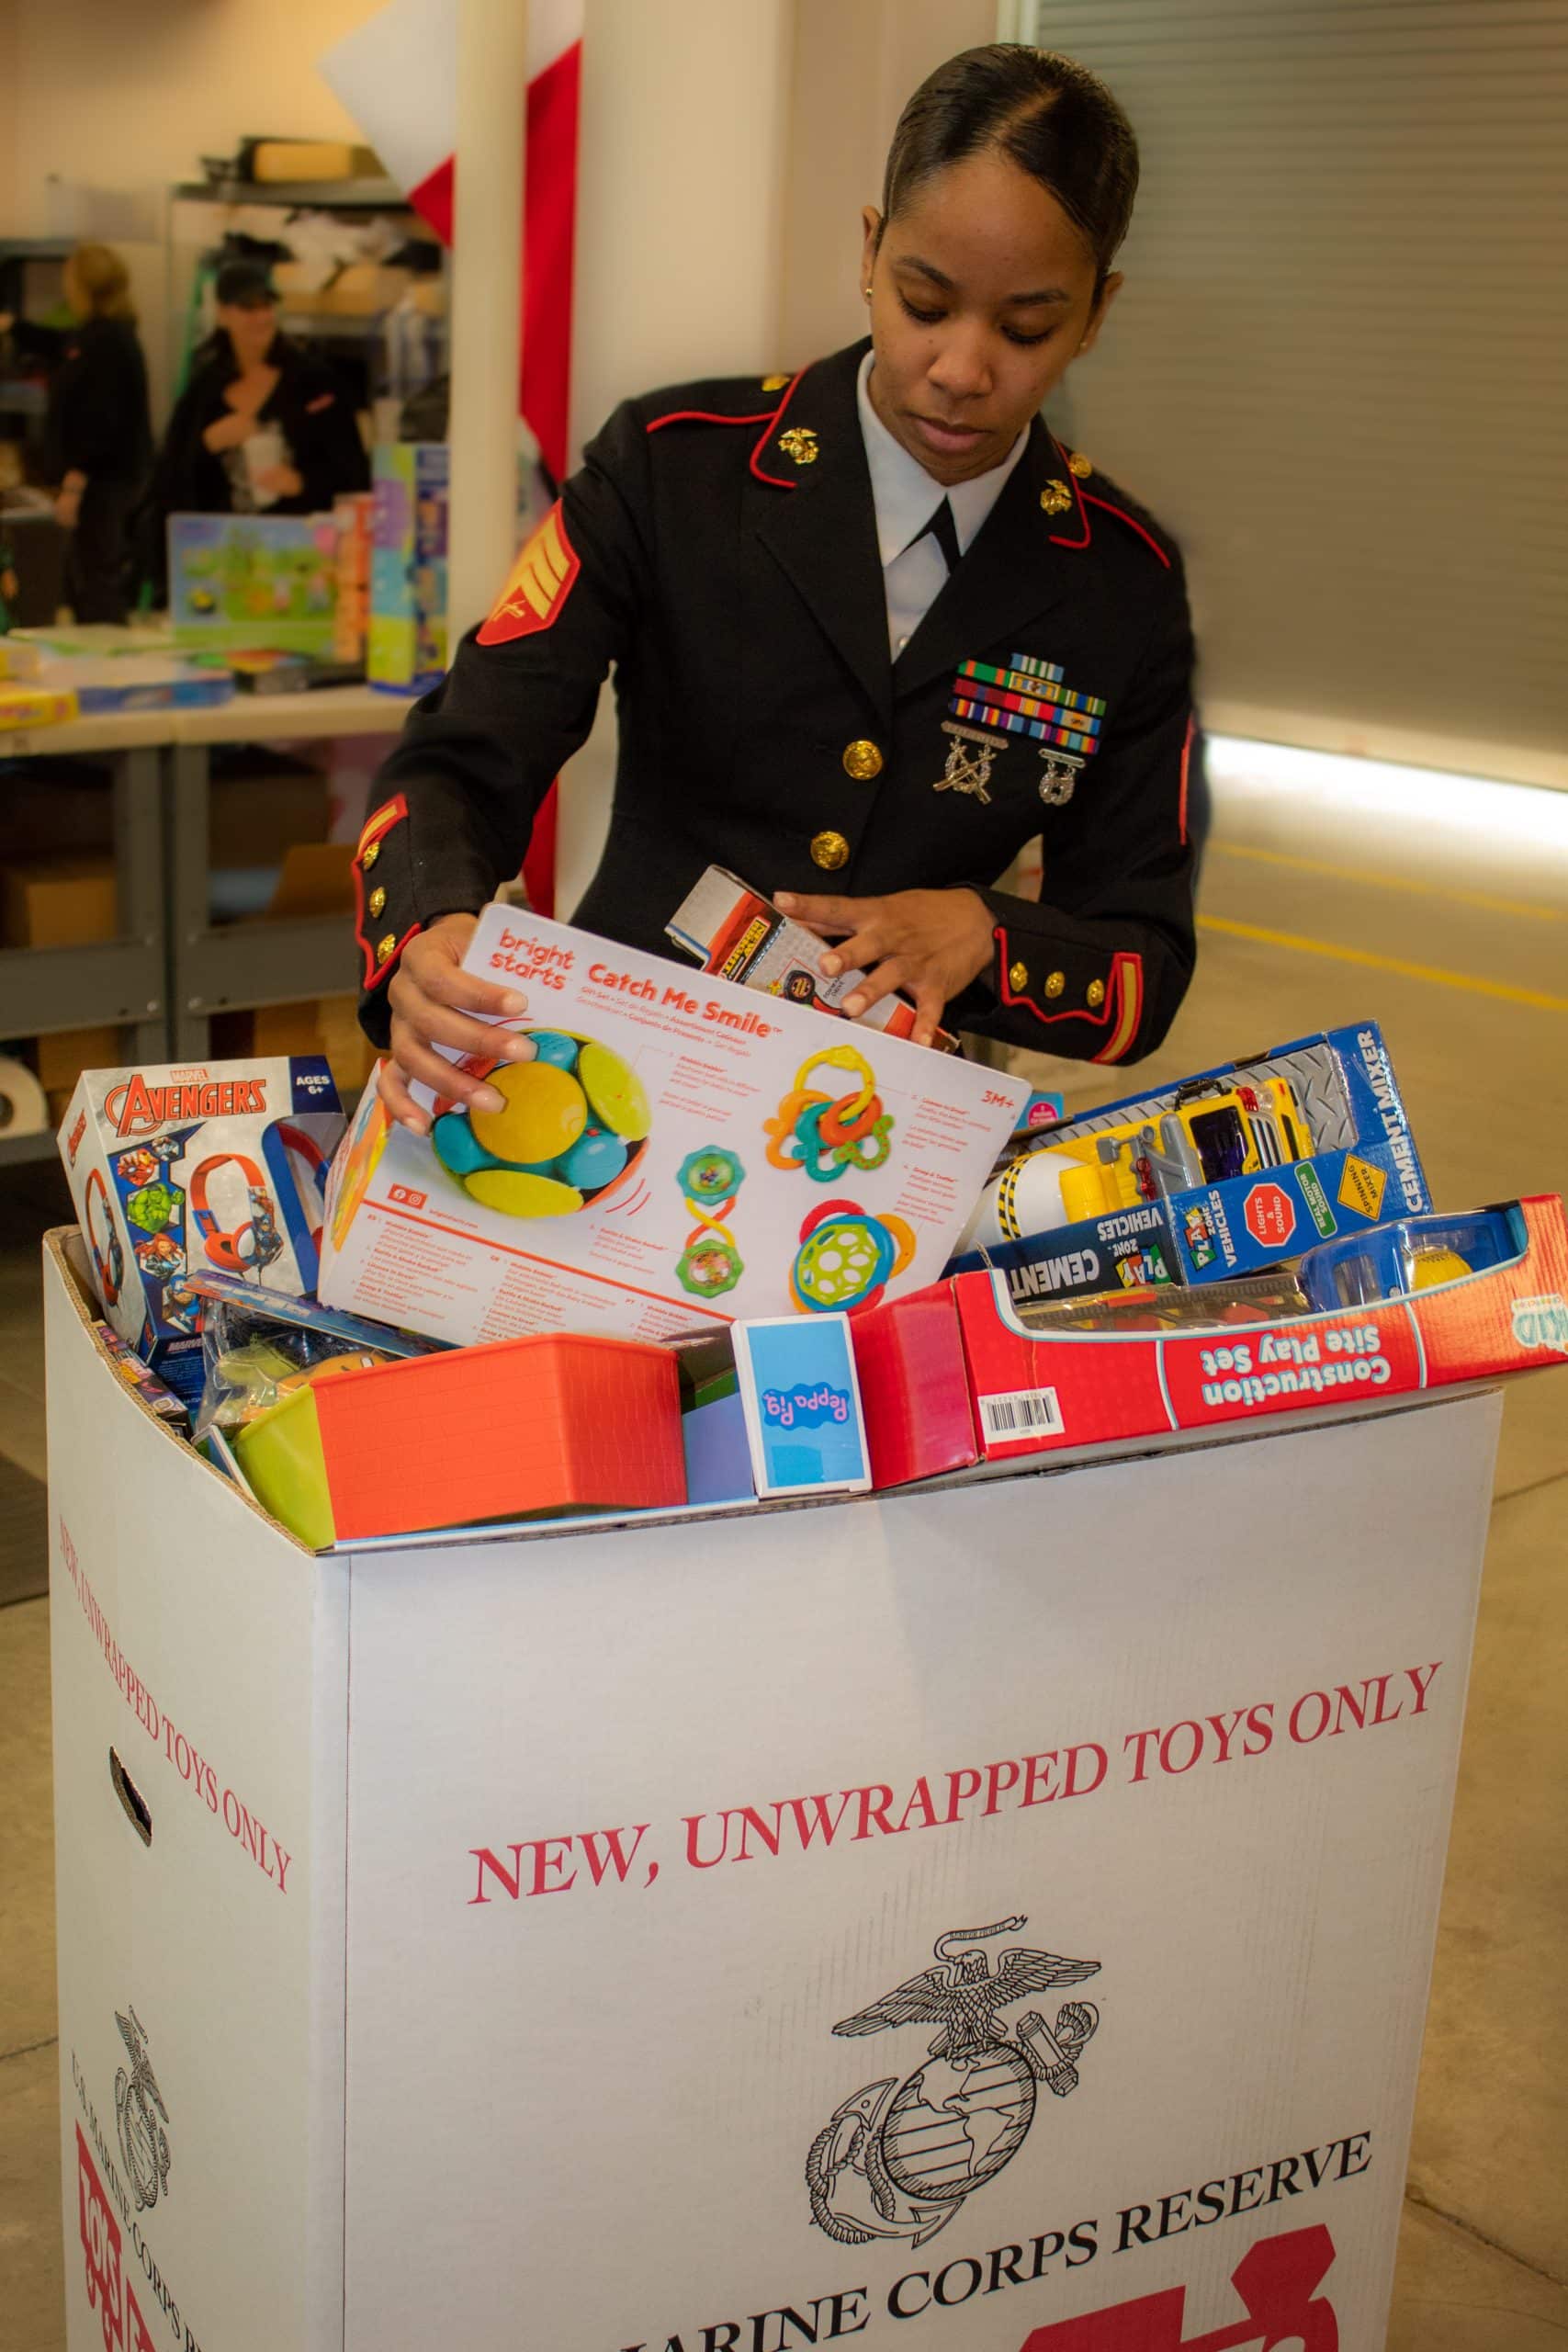 PlayMatters is an Official Toys for Tots Collection Point